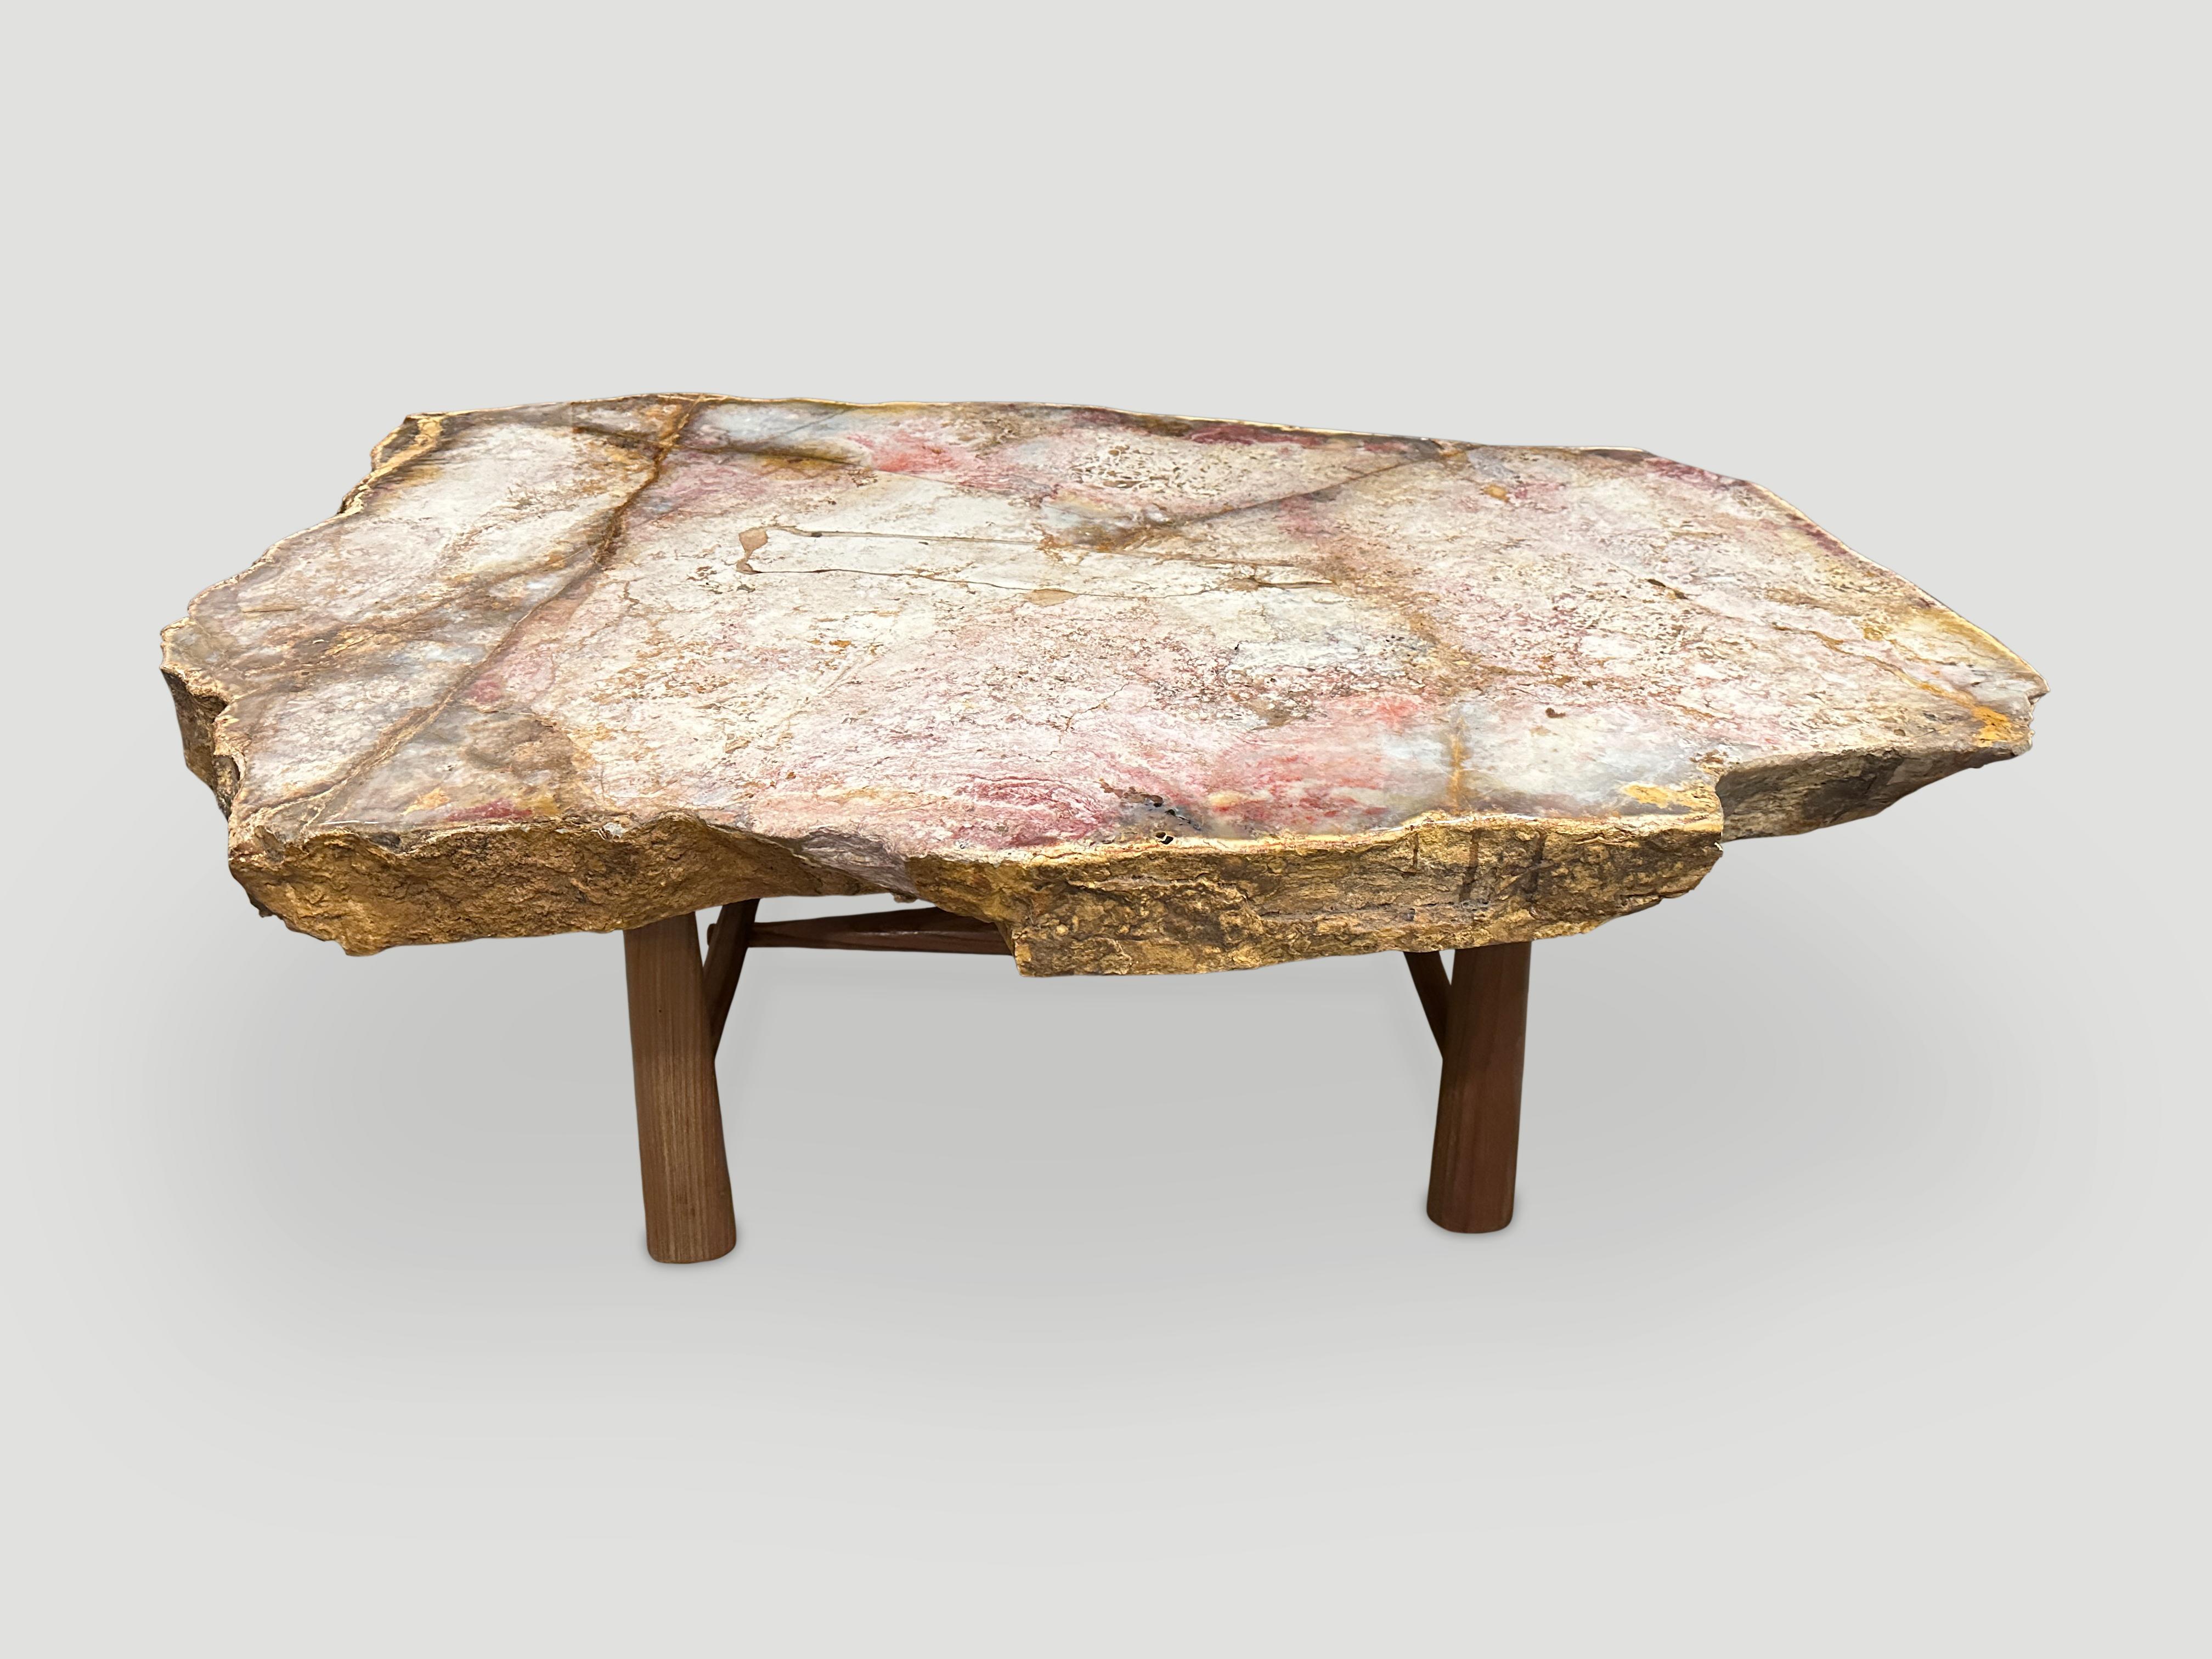 Impressive three inch slab top with the most beautiful color tones. This petrified wood is called ‘Pancawarna’ and hard to source in such a large slab. Resting on a natural teak mid century style base. It’s fascinating how Mother Nature produces